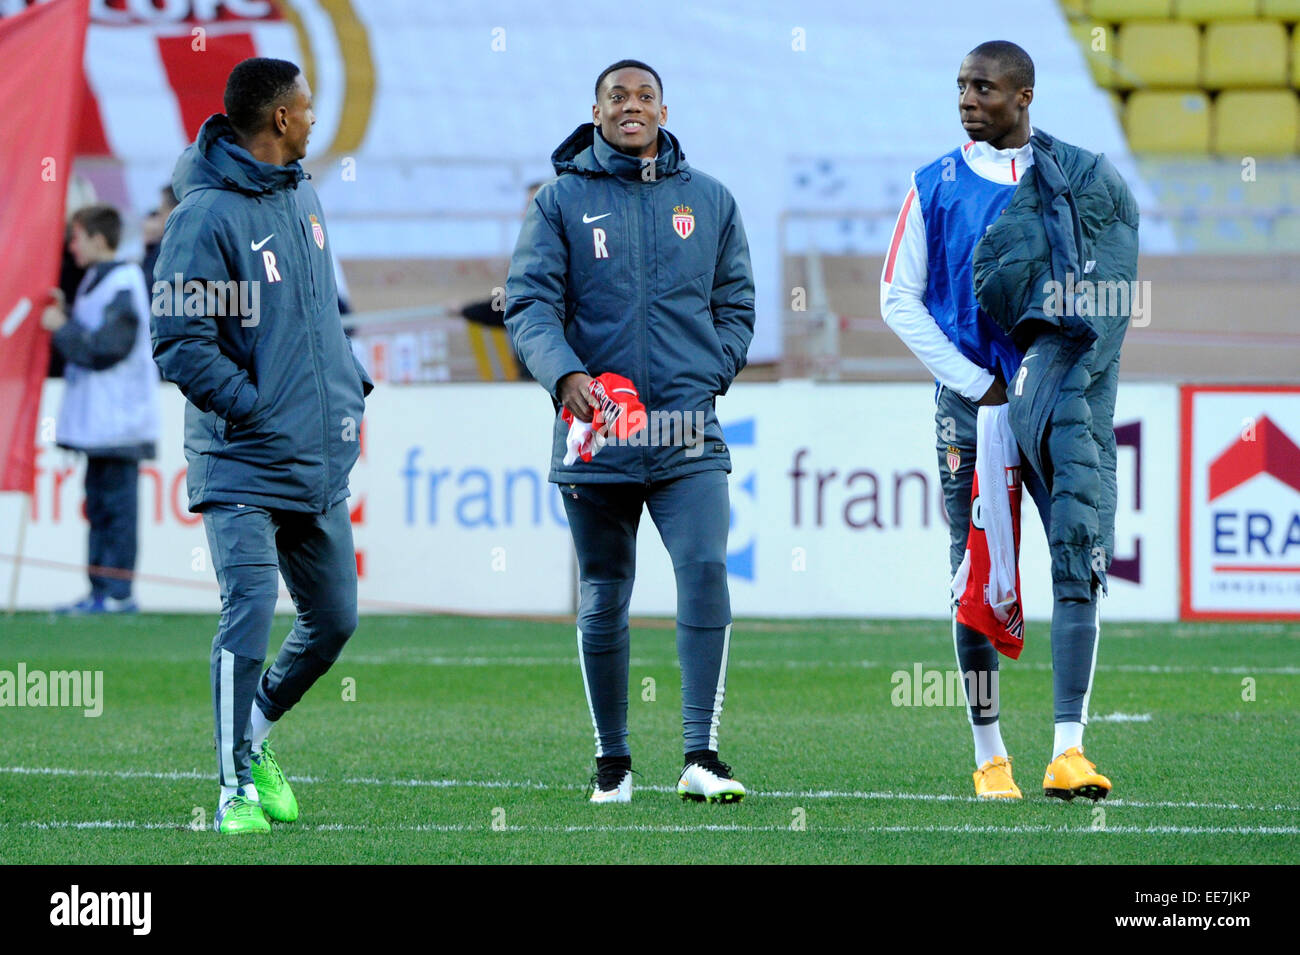 Monaco, France. 14th Jan, 2015. French League Cup (coupe de la ligue)  football. Monaco versus Guingamp. ANTHONY MARTIAL and Dylan BAHAMBOULA  during warm-up © Action Plus Sports/Alamy Live News Stock Photo -